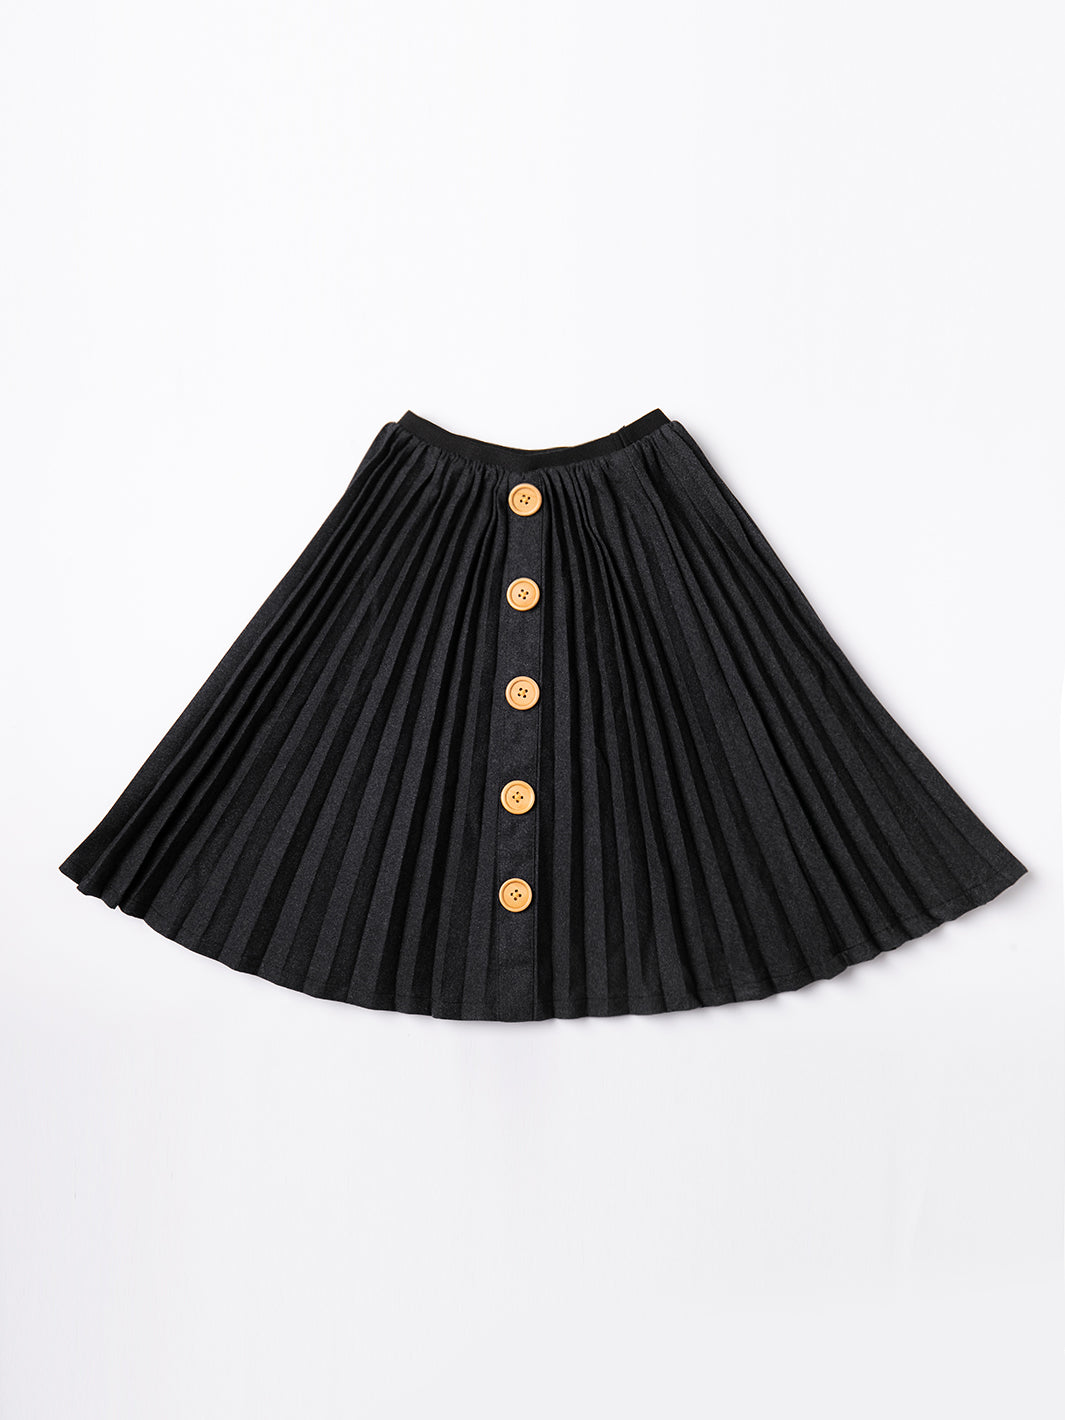 Accordion Pleats Wood Button Skirt - Charcoal